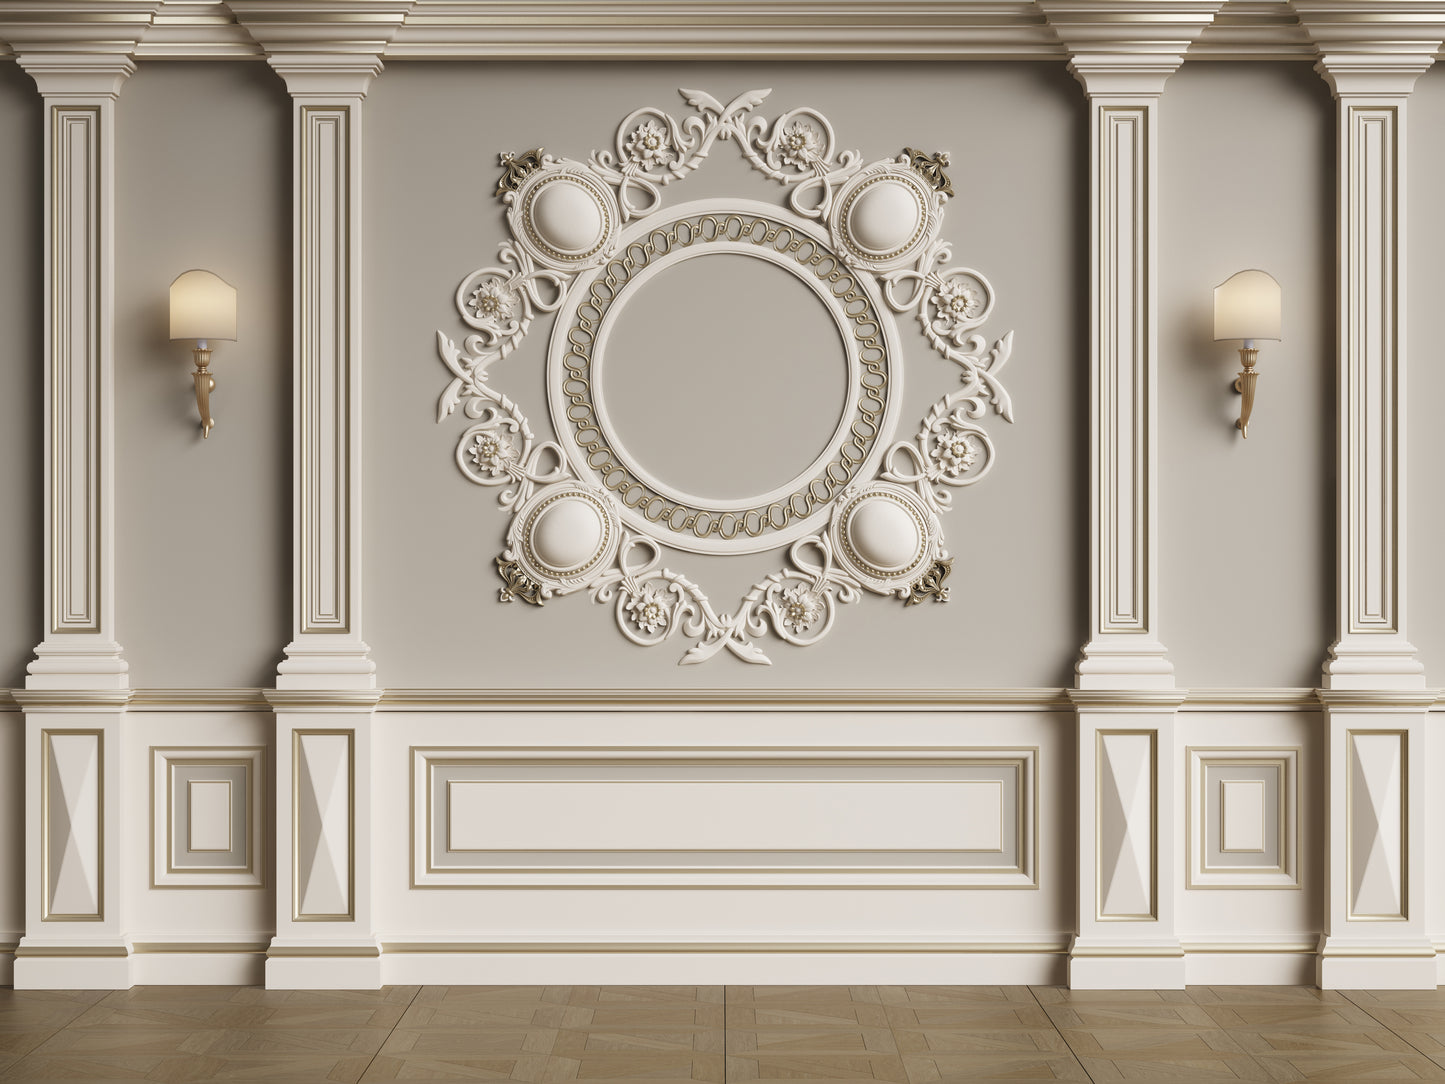 classic interior wall with moldings 3d rendering